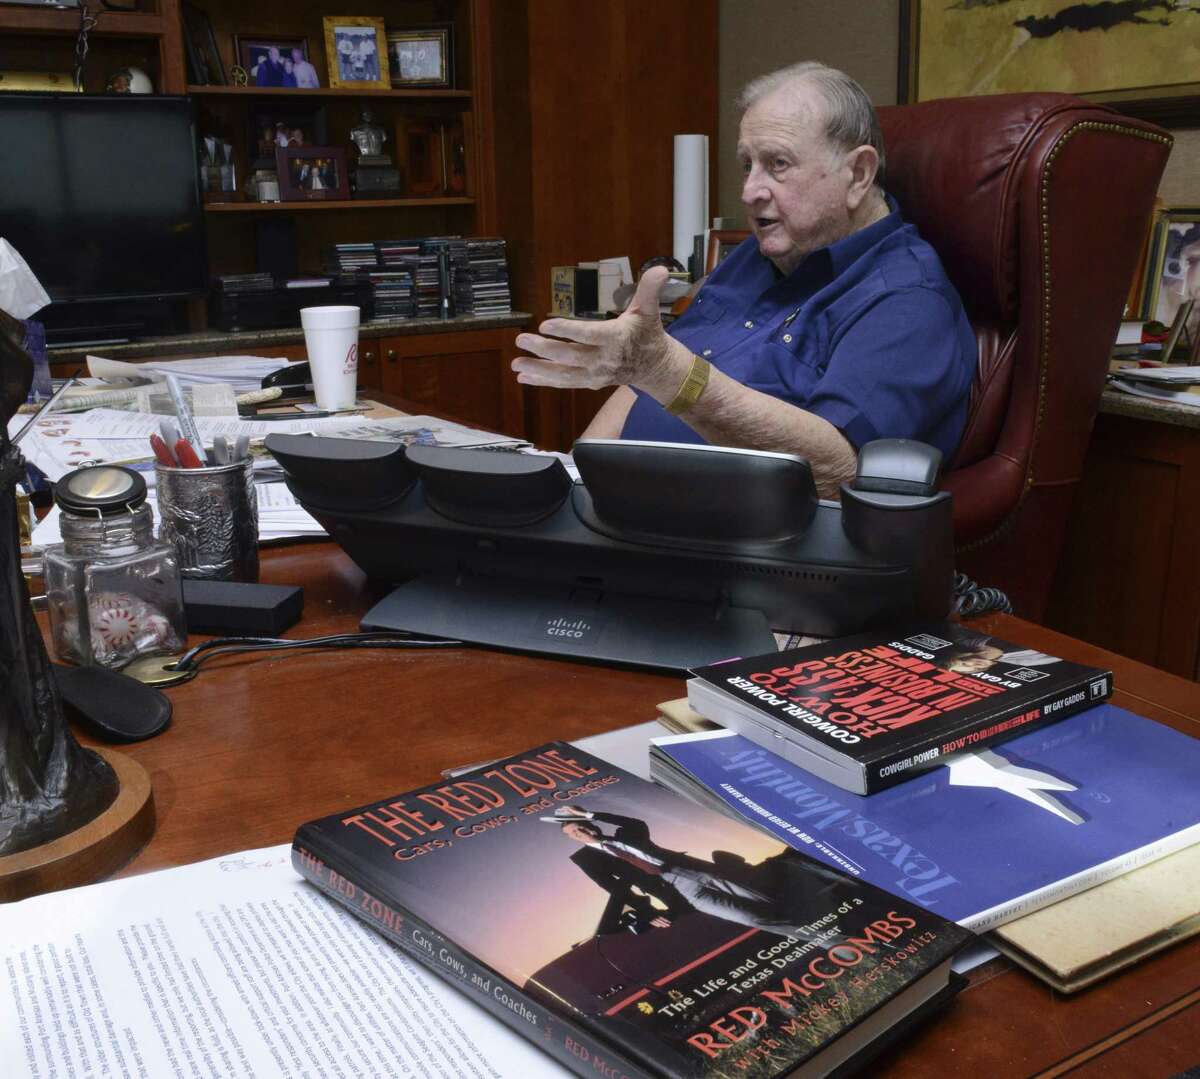 San Antonio businessman Red McCombs will soon turn 90 years old. He said that he has never considered retiring. A copy of his book, "The Red Zone," is on his desk at McCombs Enterprises in San Antonio.